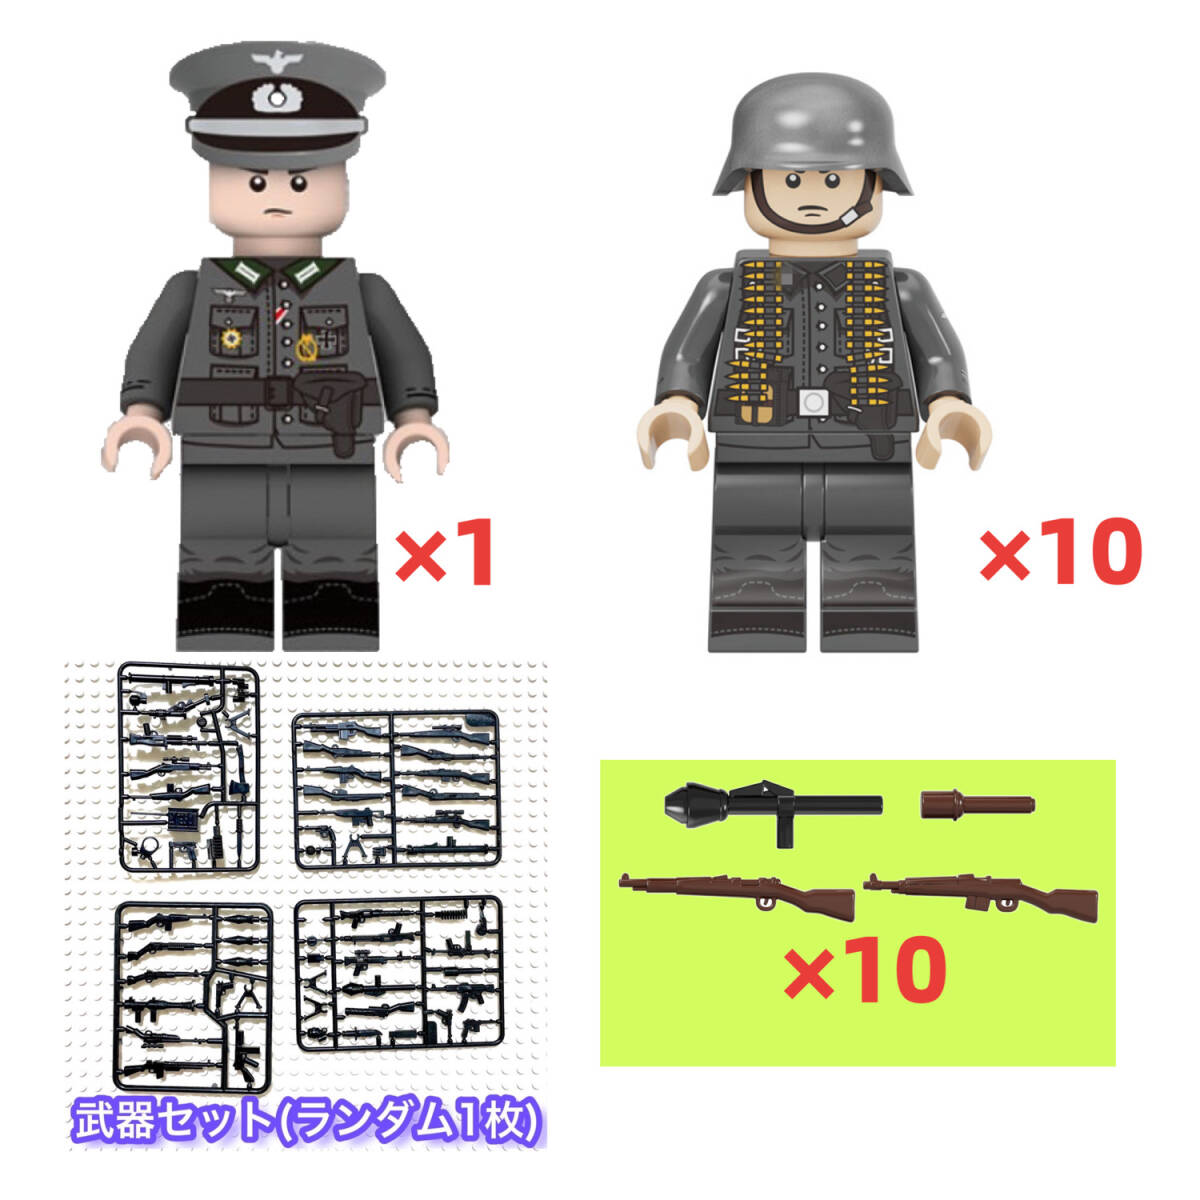 11 body set second next world large war WW2 Germany army whole surface printing E 360° military weapon Lego interchangeable Mini fig figure set sale free shipping anonymity delivery 